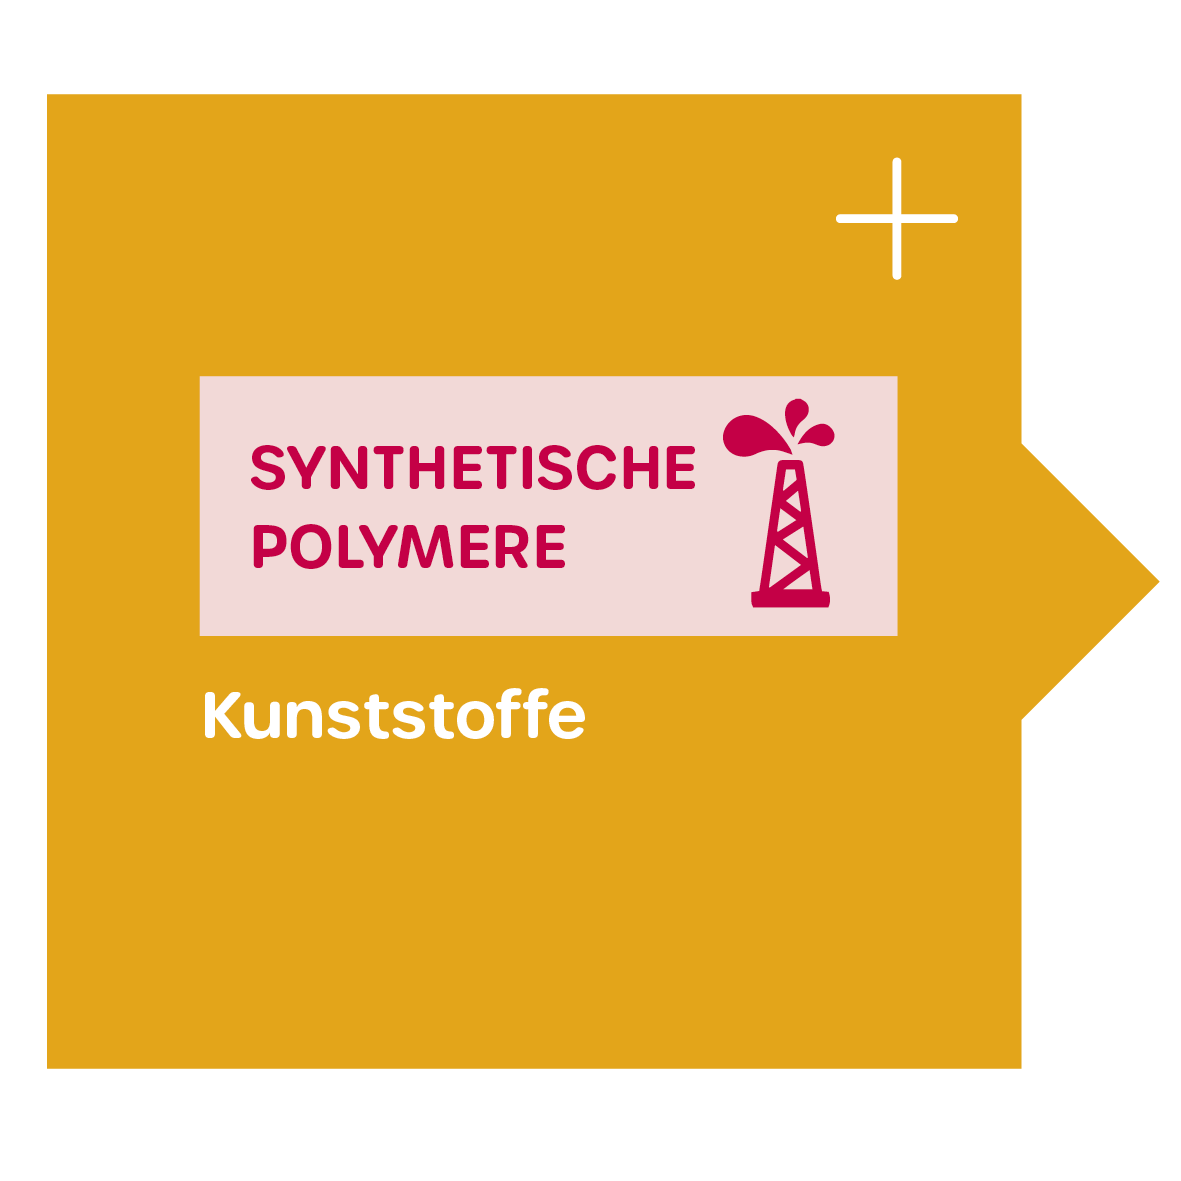 Synthetische Polymere